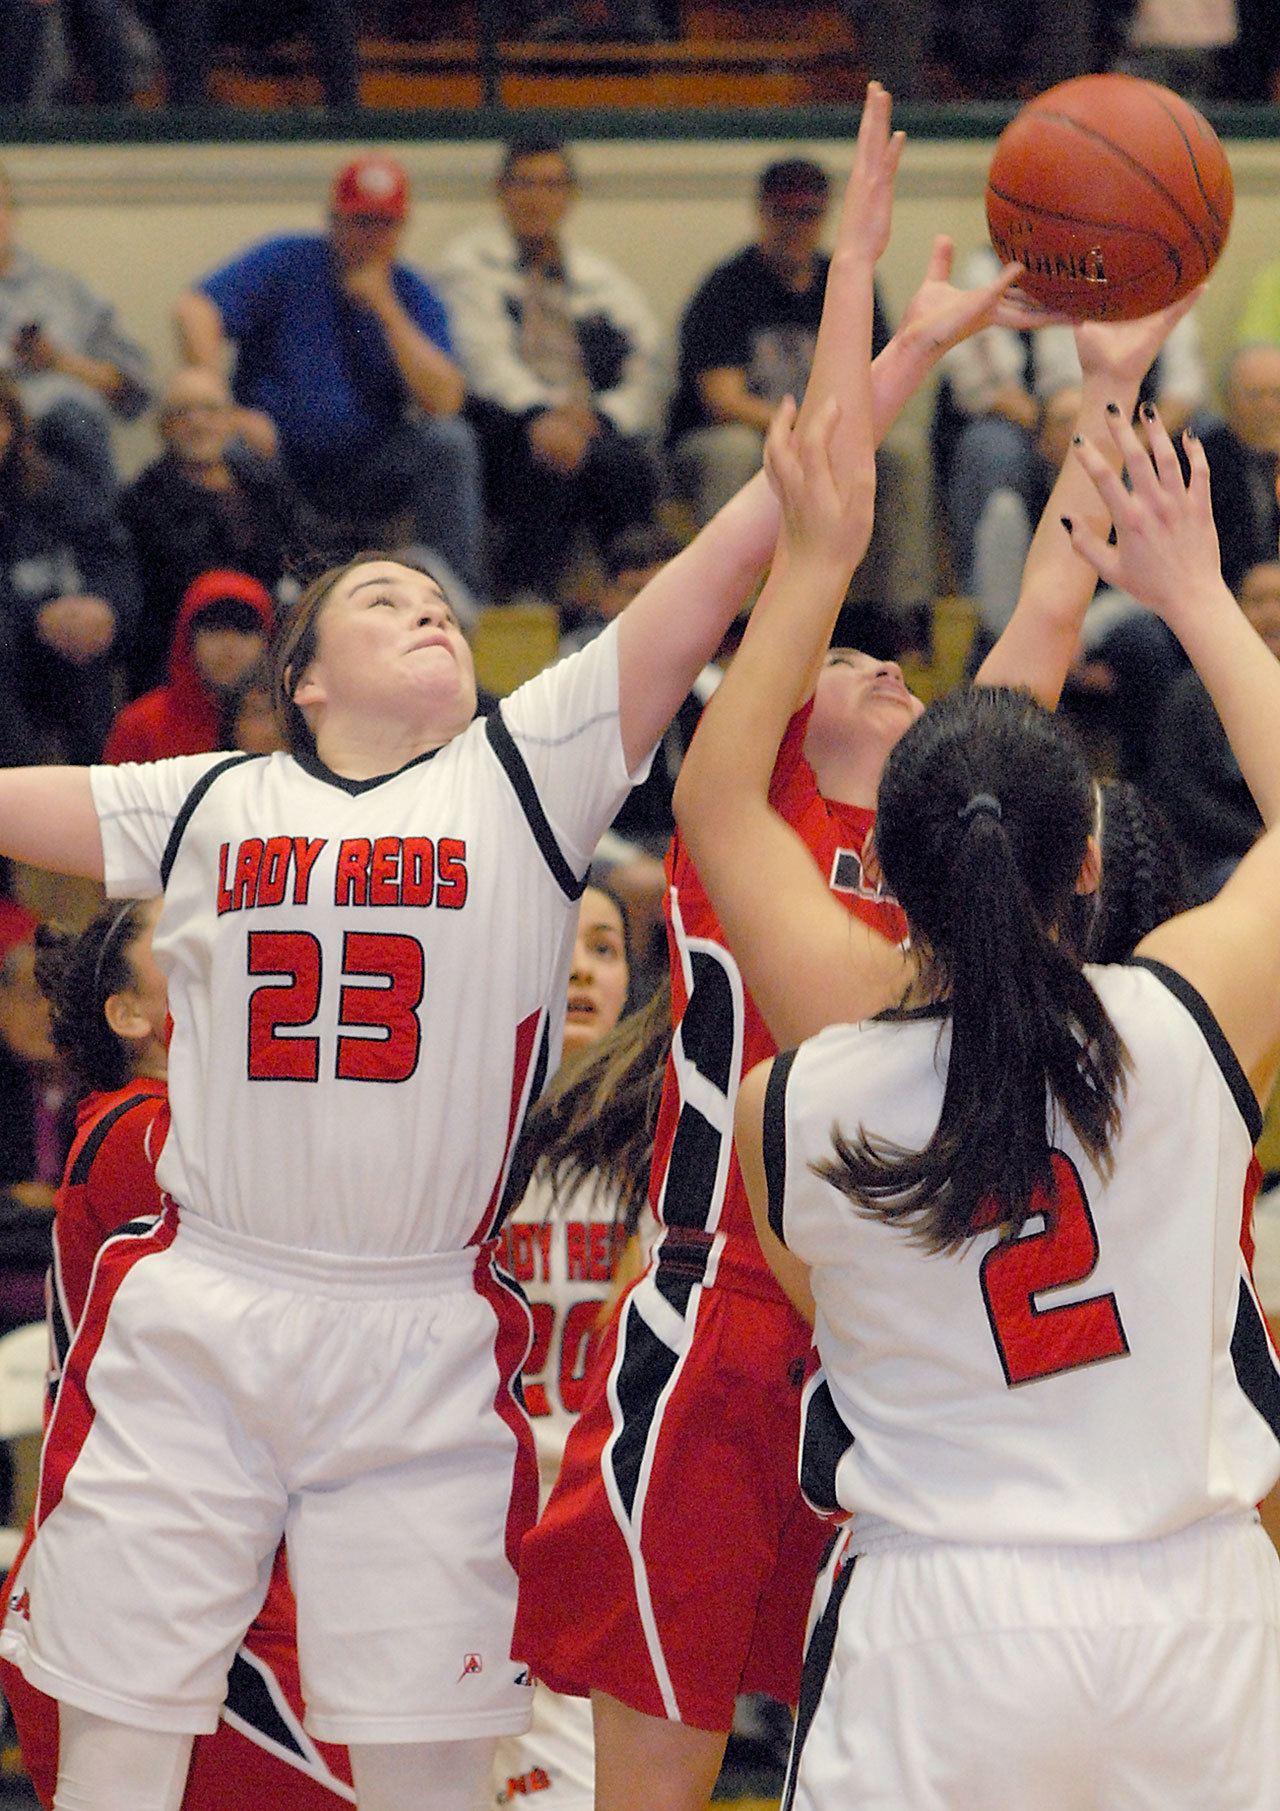 Keith Thorpe/Peninsula Daily News Neah Bay’s Tristin Johnson, left, and Kayla Winck, right, compete for a rebound with Tulalip Heritage’s Myrna Redleaf during the fourth quarter of Thursday night’s playoff game at Port Angeles High School.                                Keith Thorpe/Peninsula Daily News Neah Bay’s Tristin Johnson, left, and Kayla Winck, right, compete for a rebound with Tulalip Heritage’s Myrna Redleaf during the fourth quarter of Thursday night’s playoff game at Port Angeles High School.